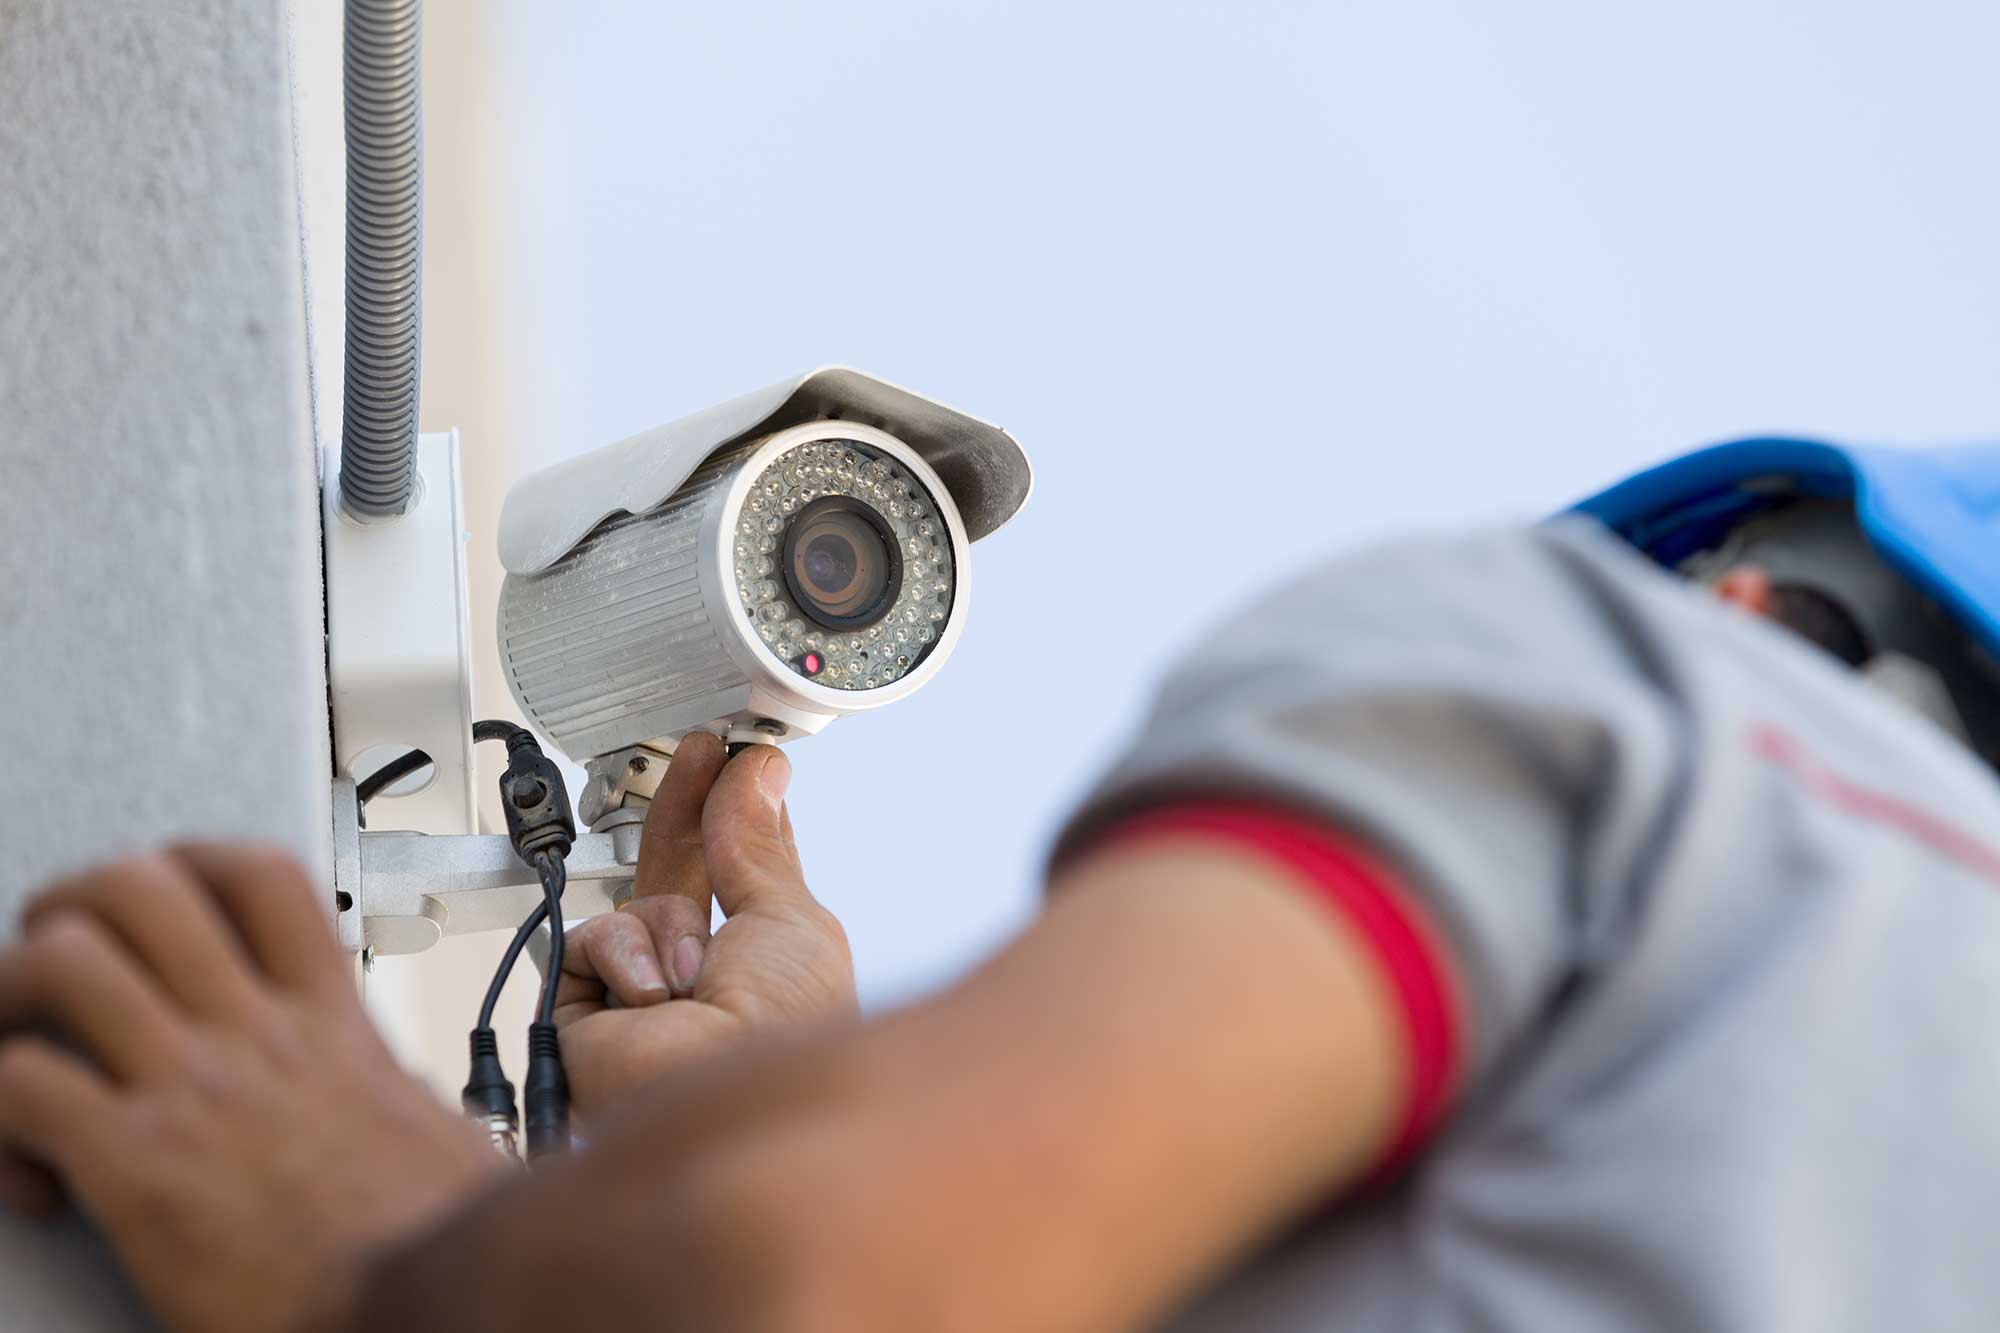 How to find a reliable security camera installer